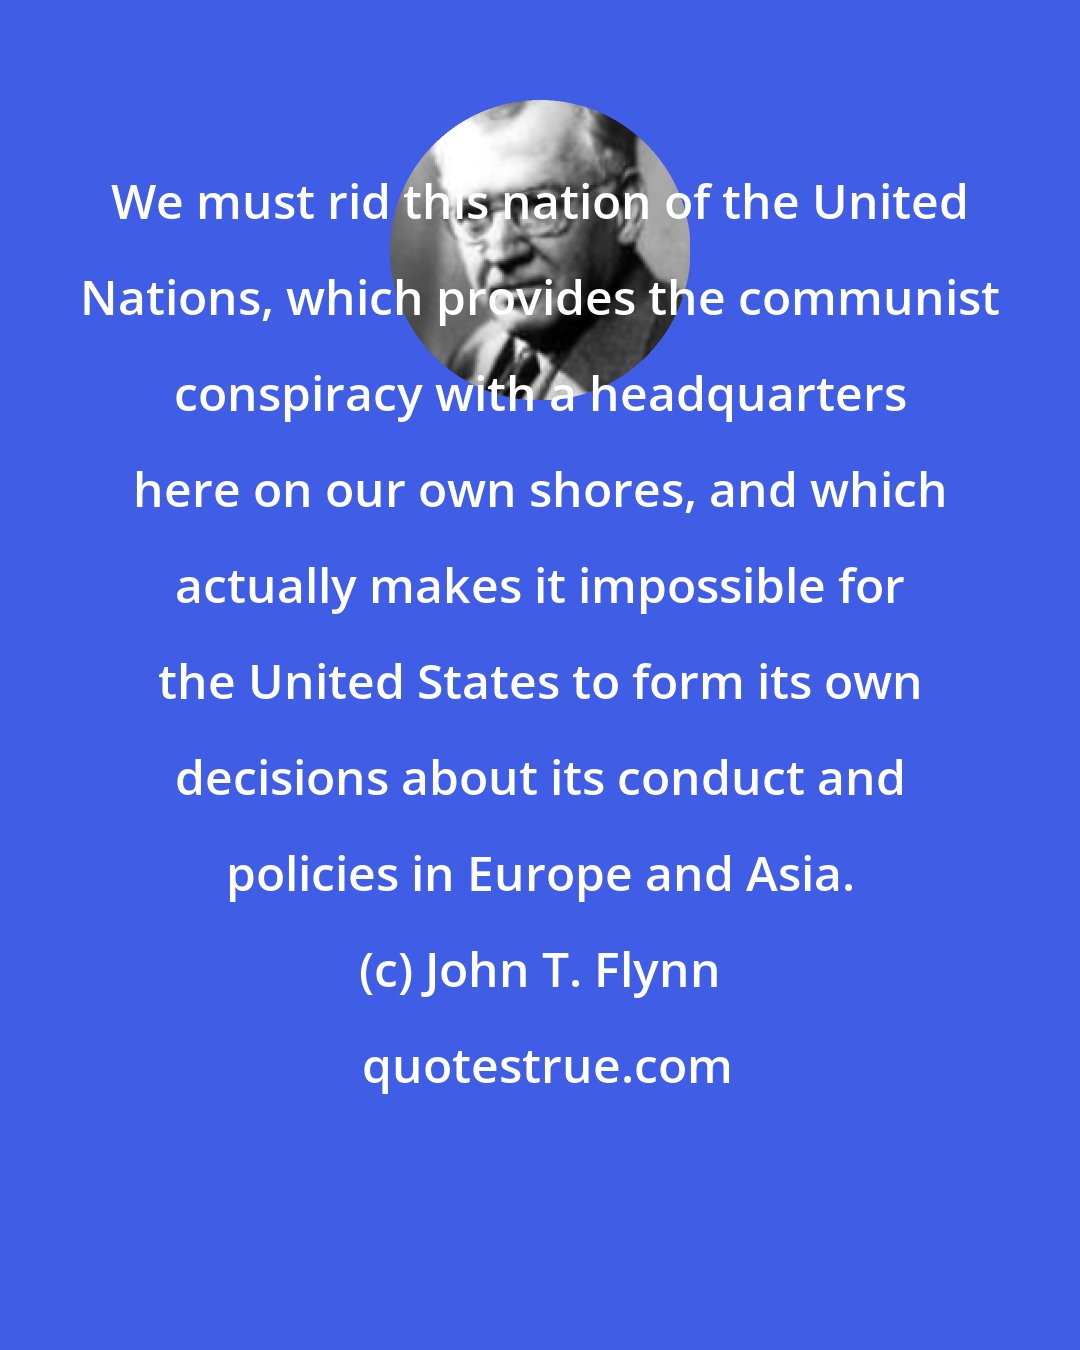 John T. Flynn: We must rid this nation of the United Nations, which provides the communist conspiracy with a headquarters here on our own shores, and which actually makes it impossible for the United States to form its own decisions about its conduct and policies in Europe and Asia.